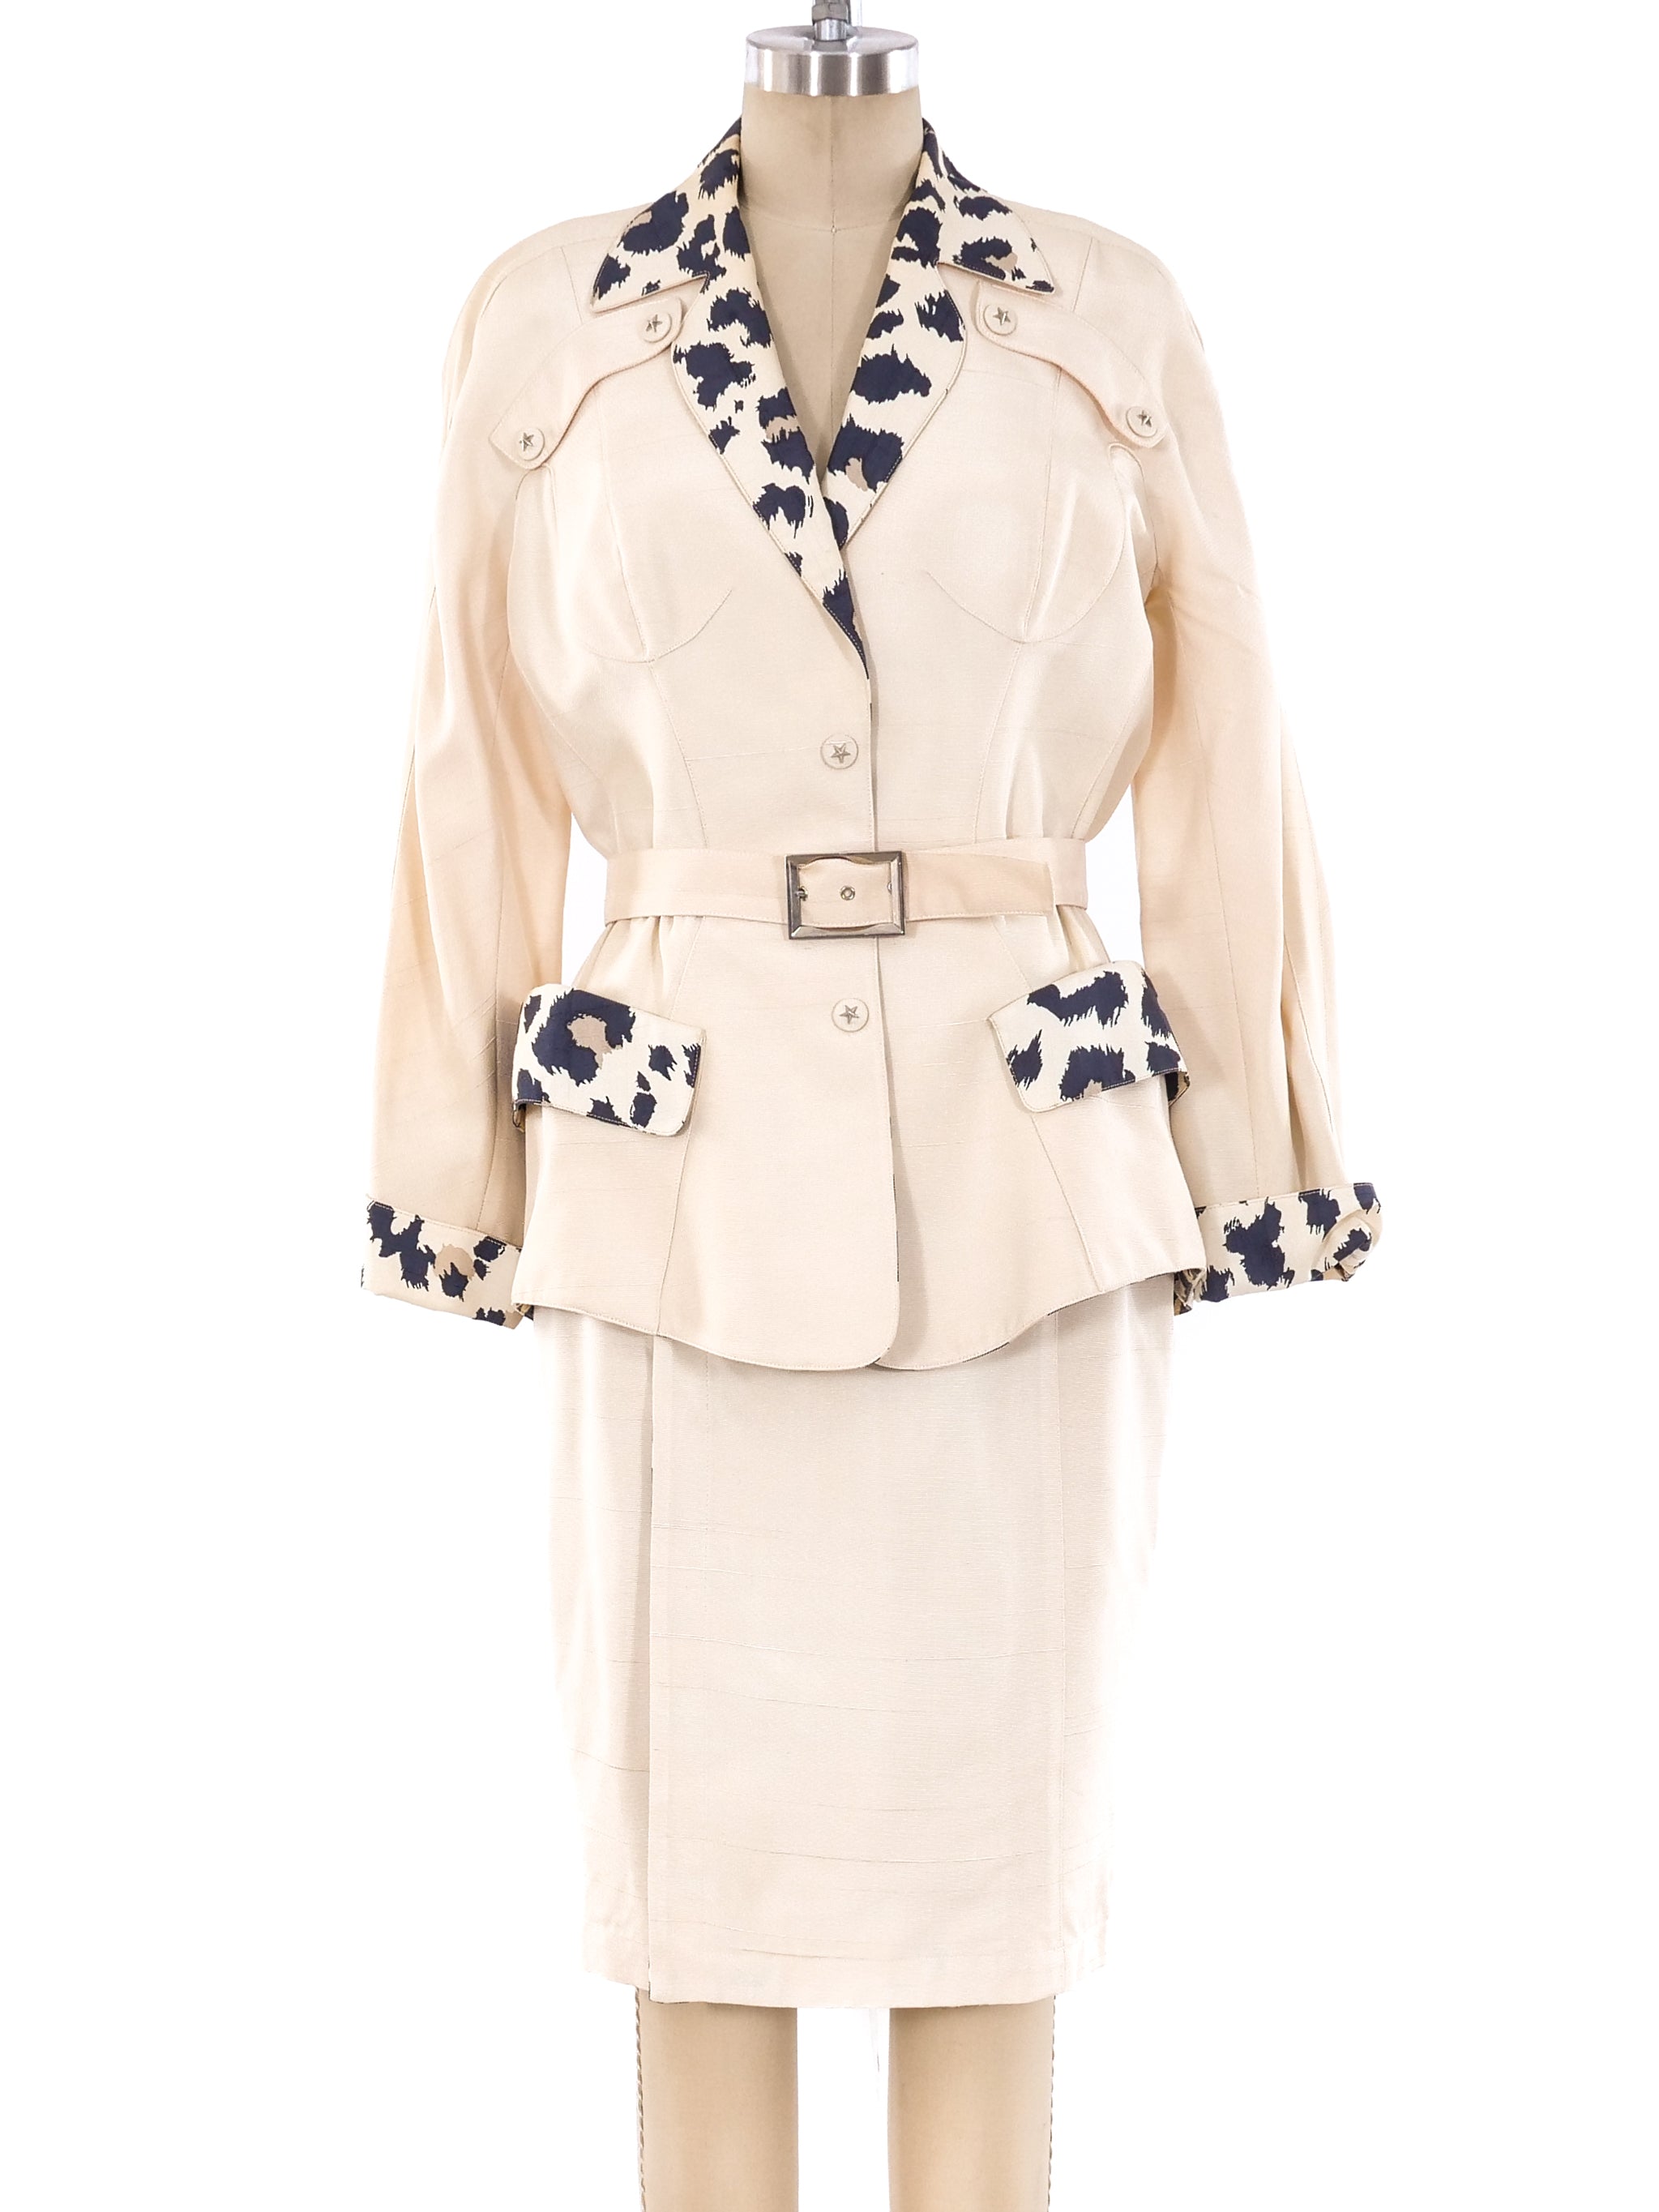 Thierry Mugler Leopard Print Trimmed Suit